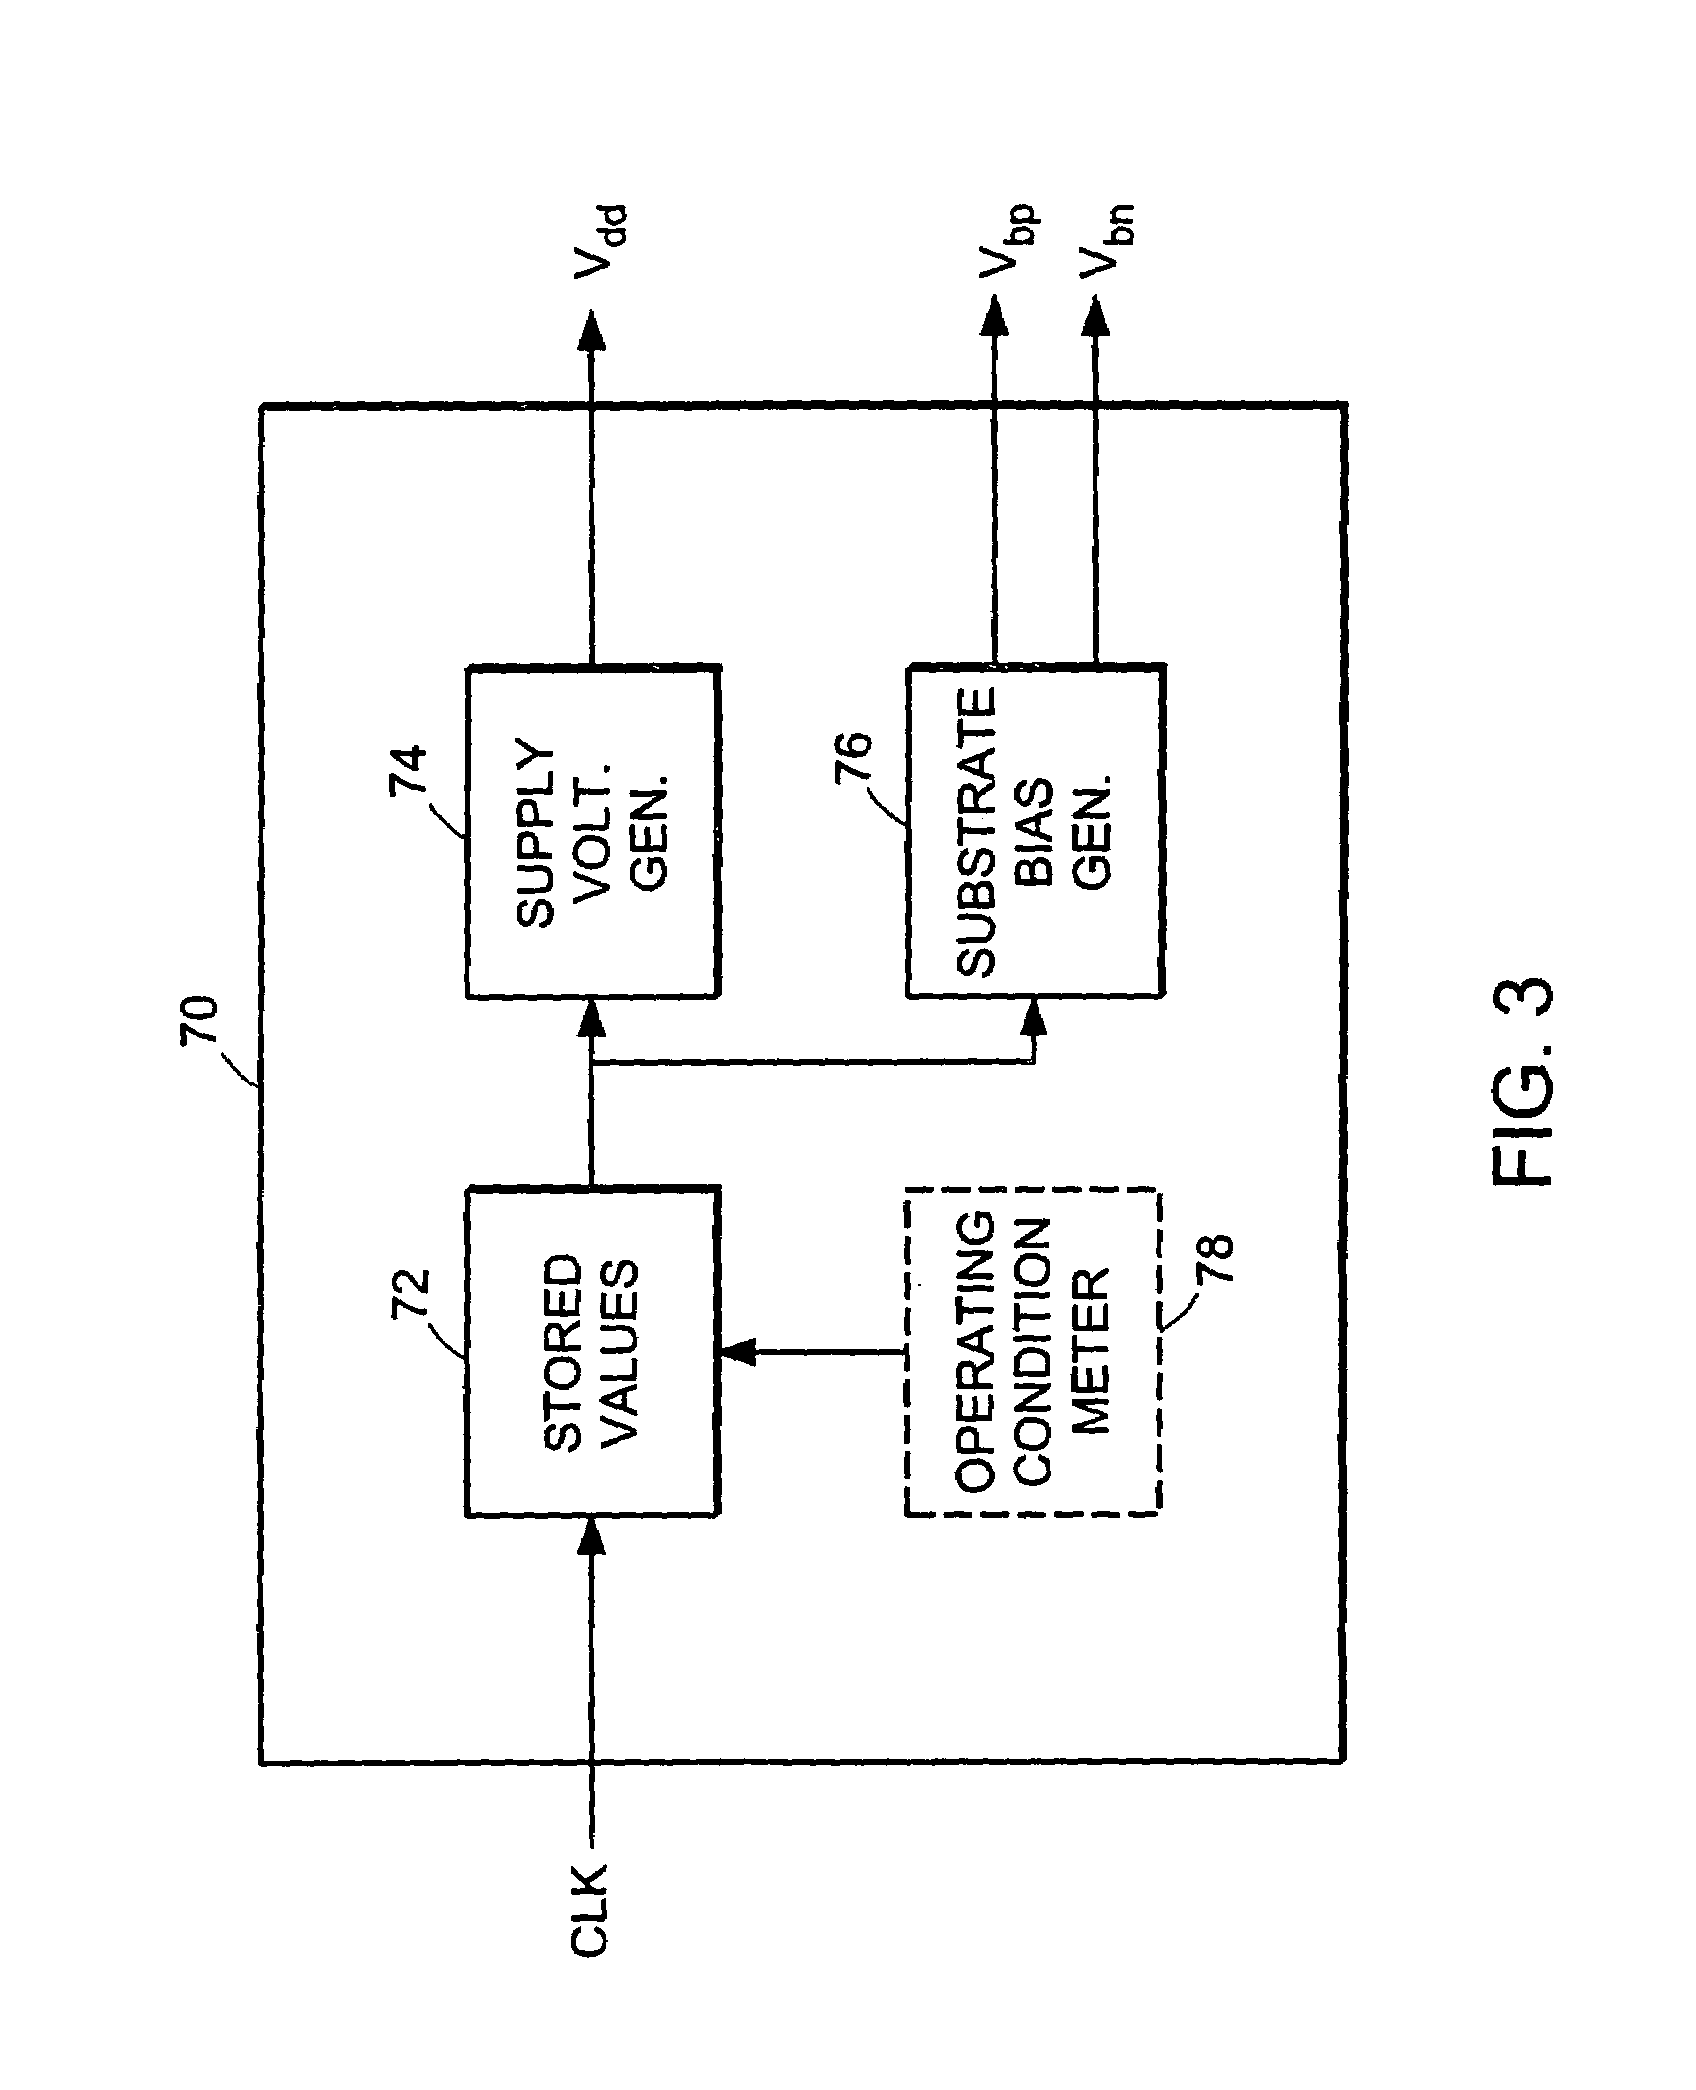 Adaptive power supply and substrate control for ultra low power digital processors using triple well control